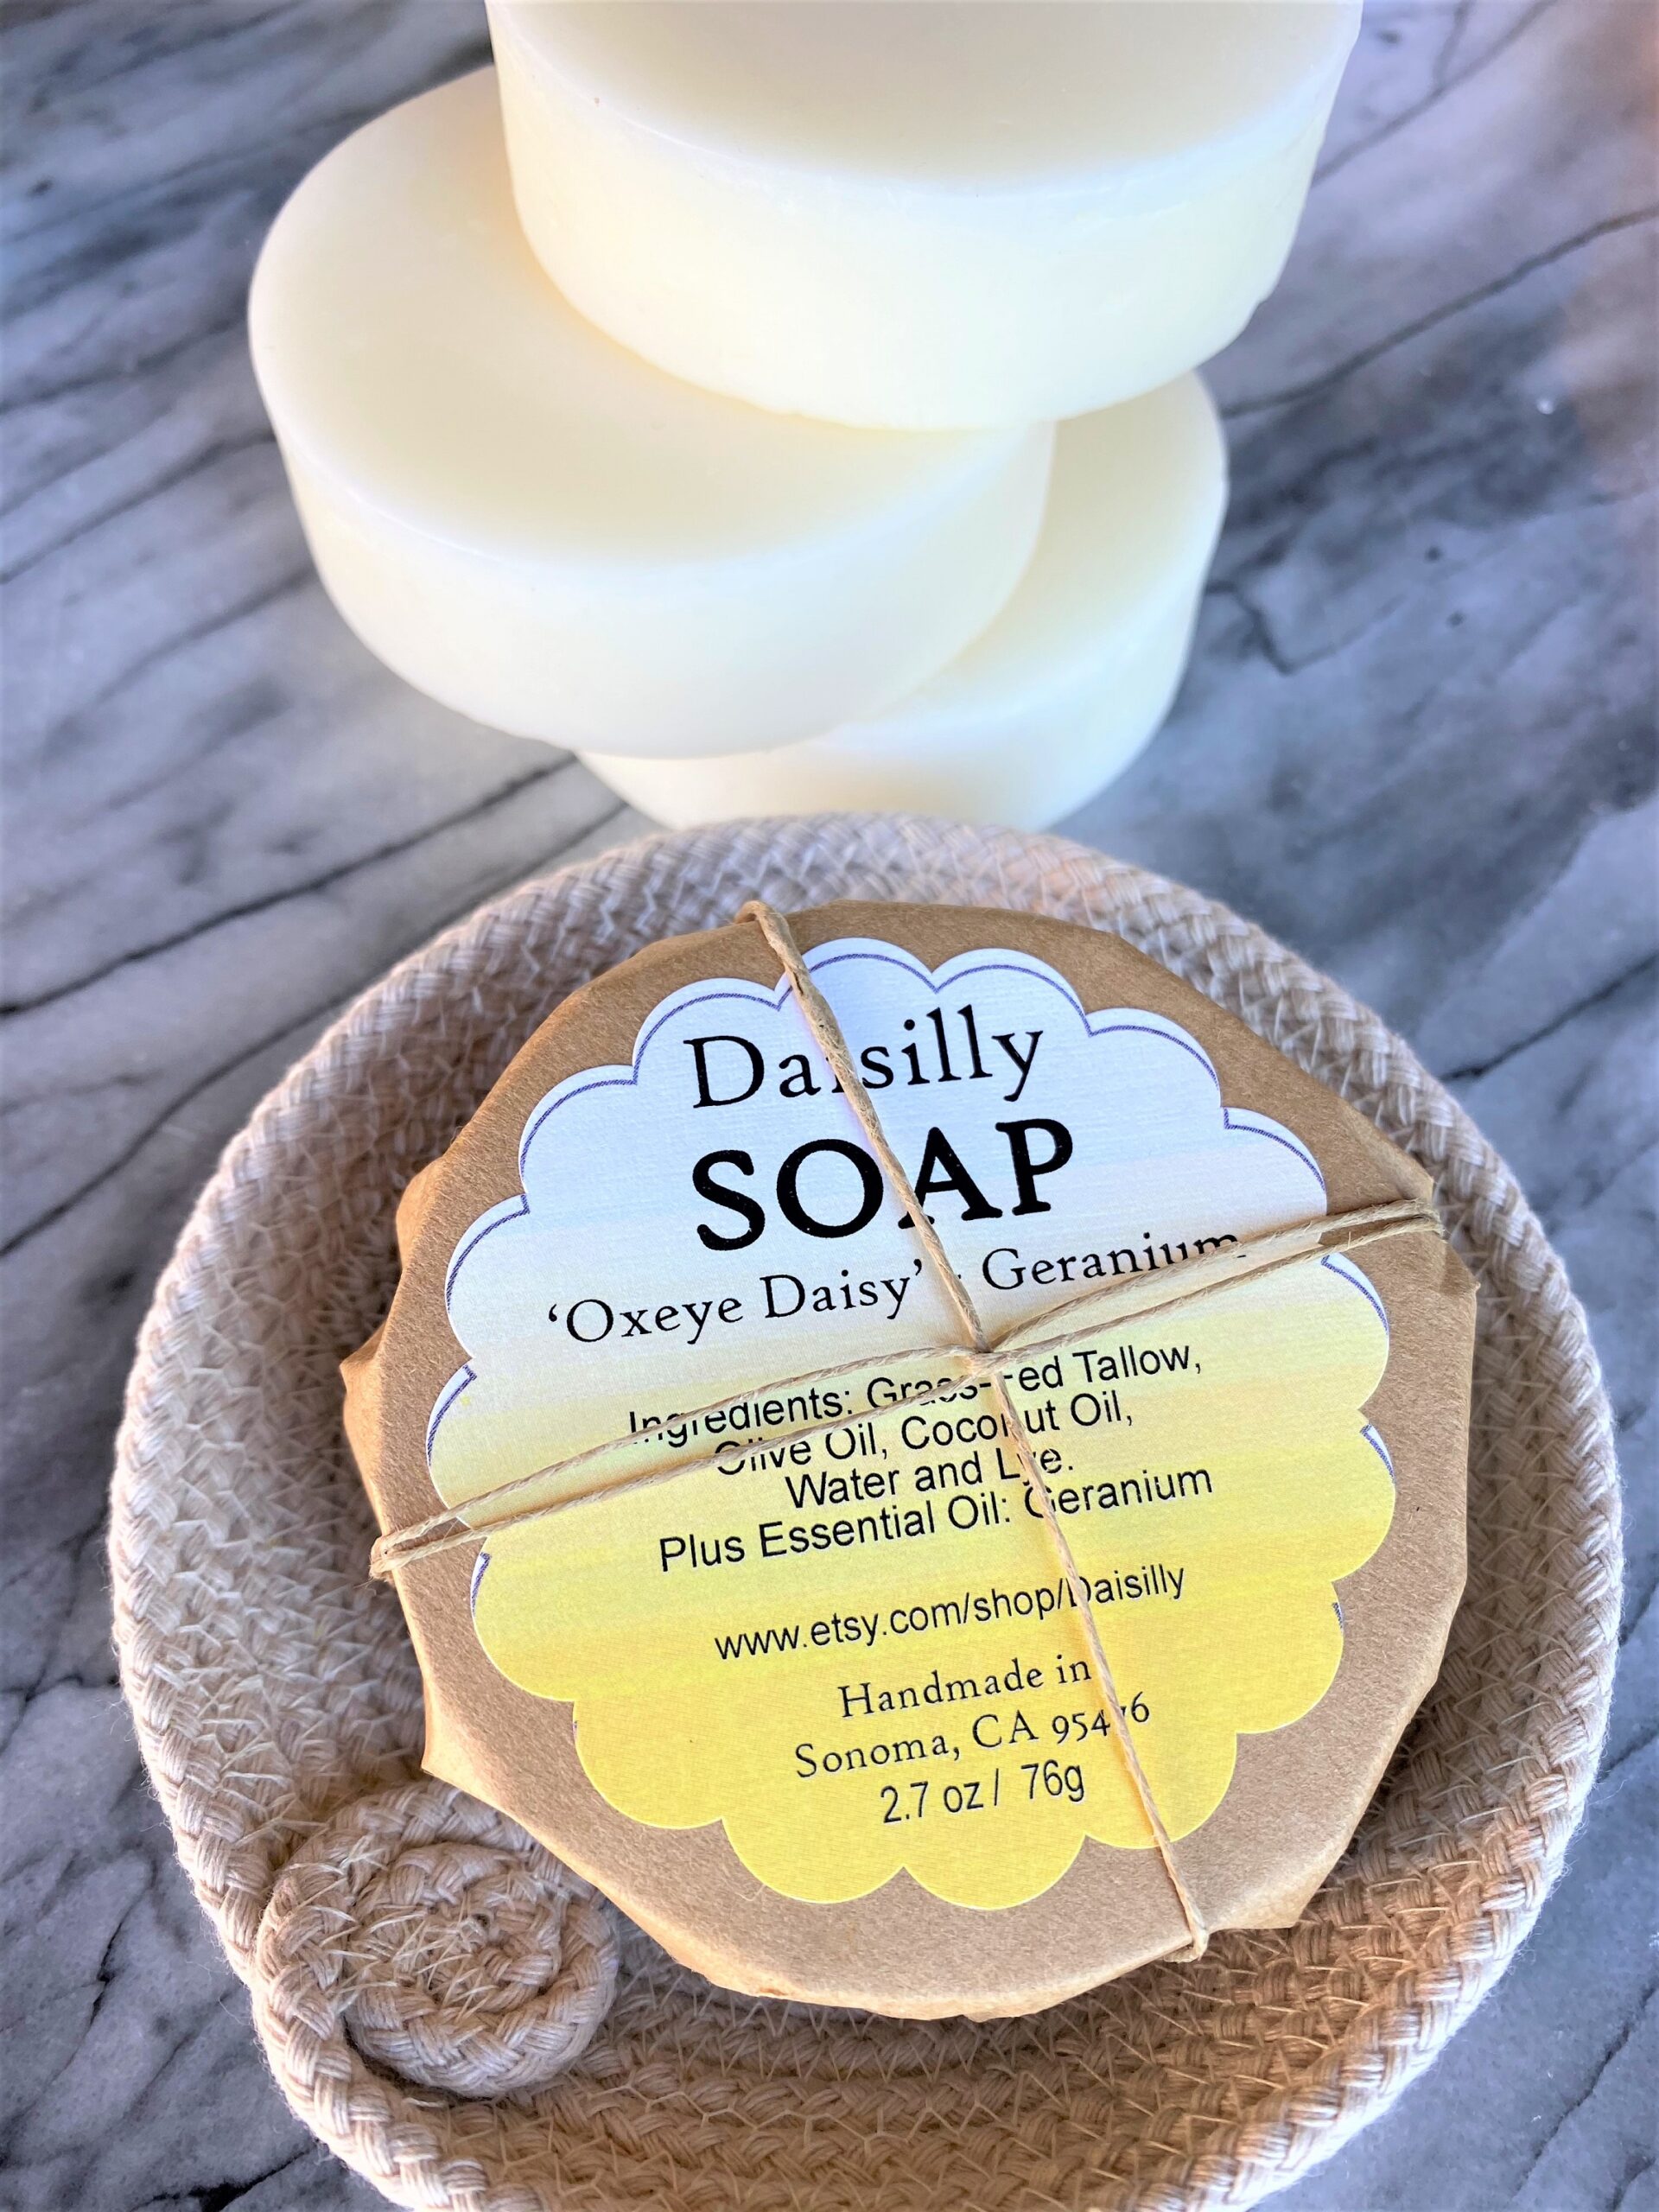 Soap - Daisilly - Handmade Soap from Sonoma, How Daisilly!